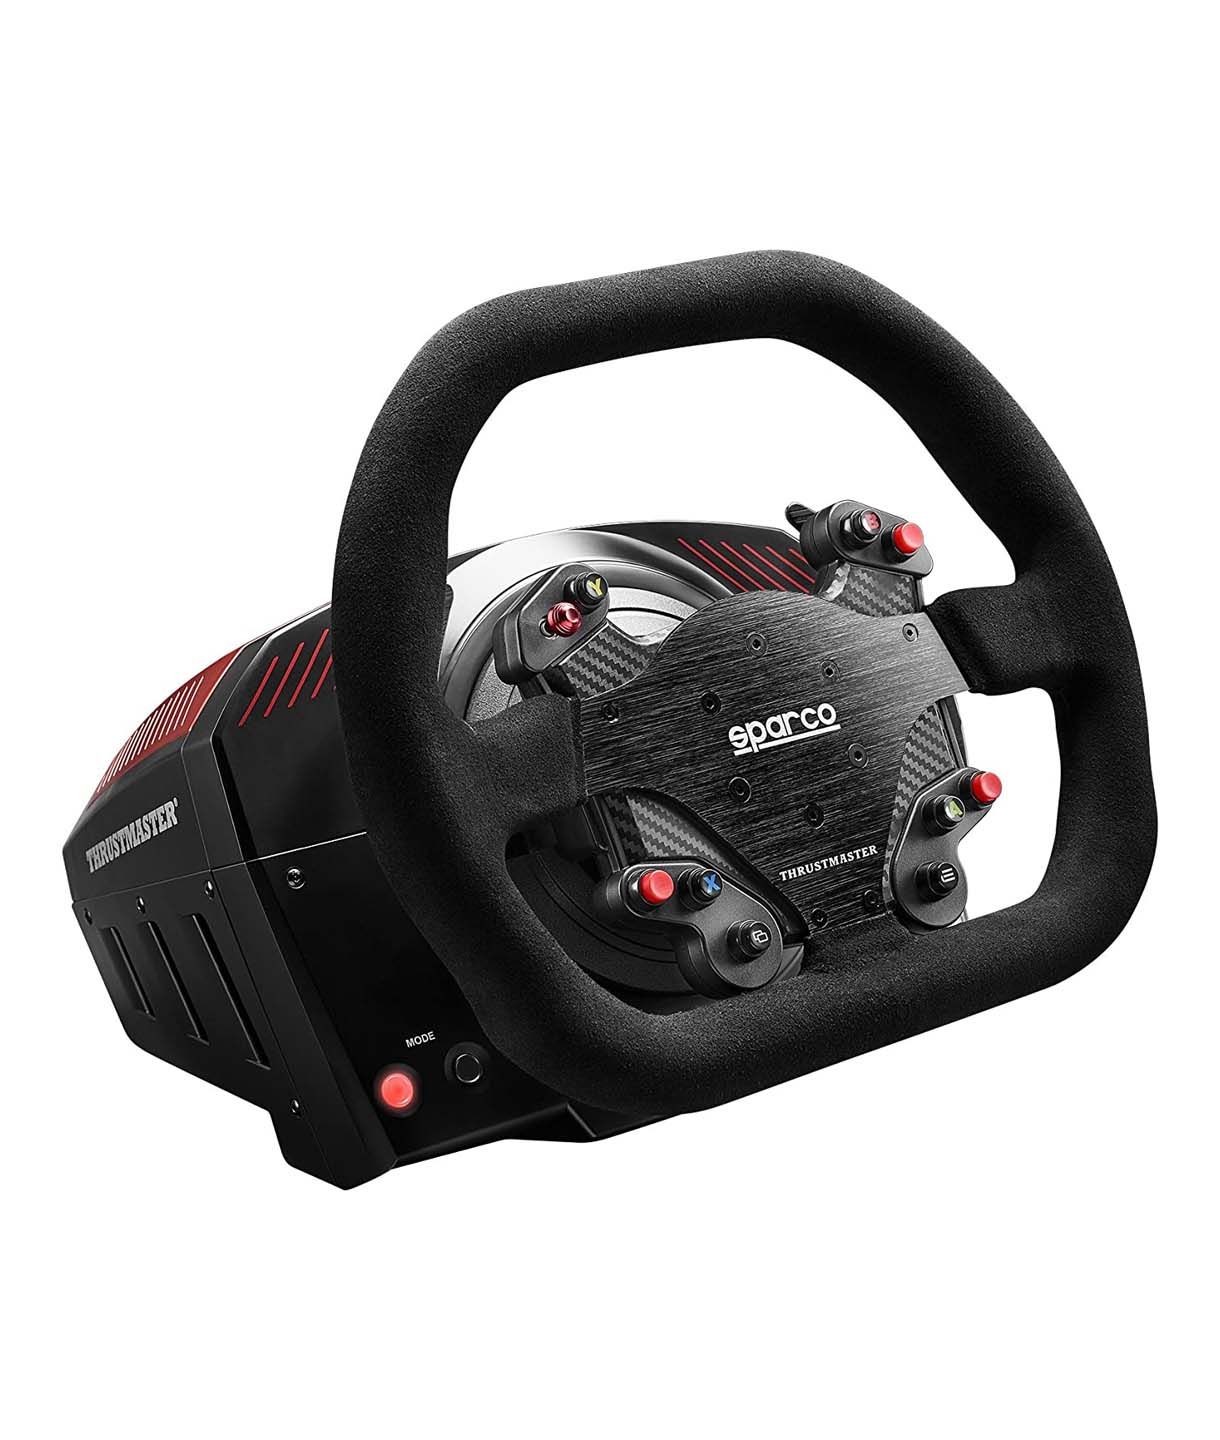 Vô Lăng Thrustmaster Ts Xw Racer Sparco P310 Competition Mod 3